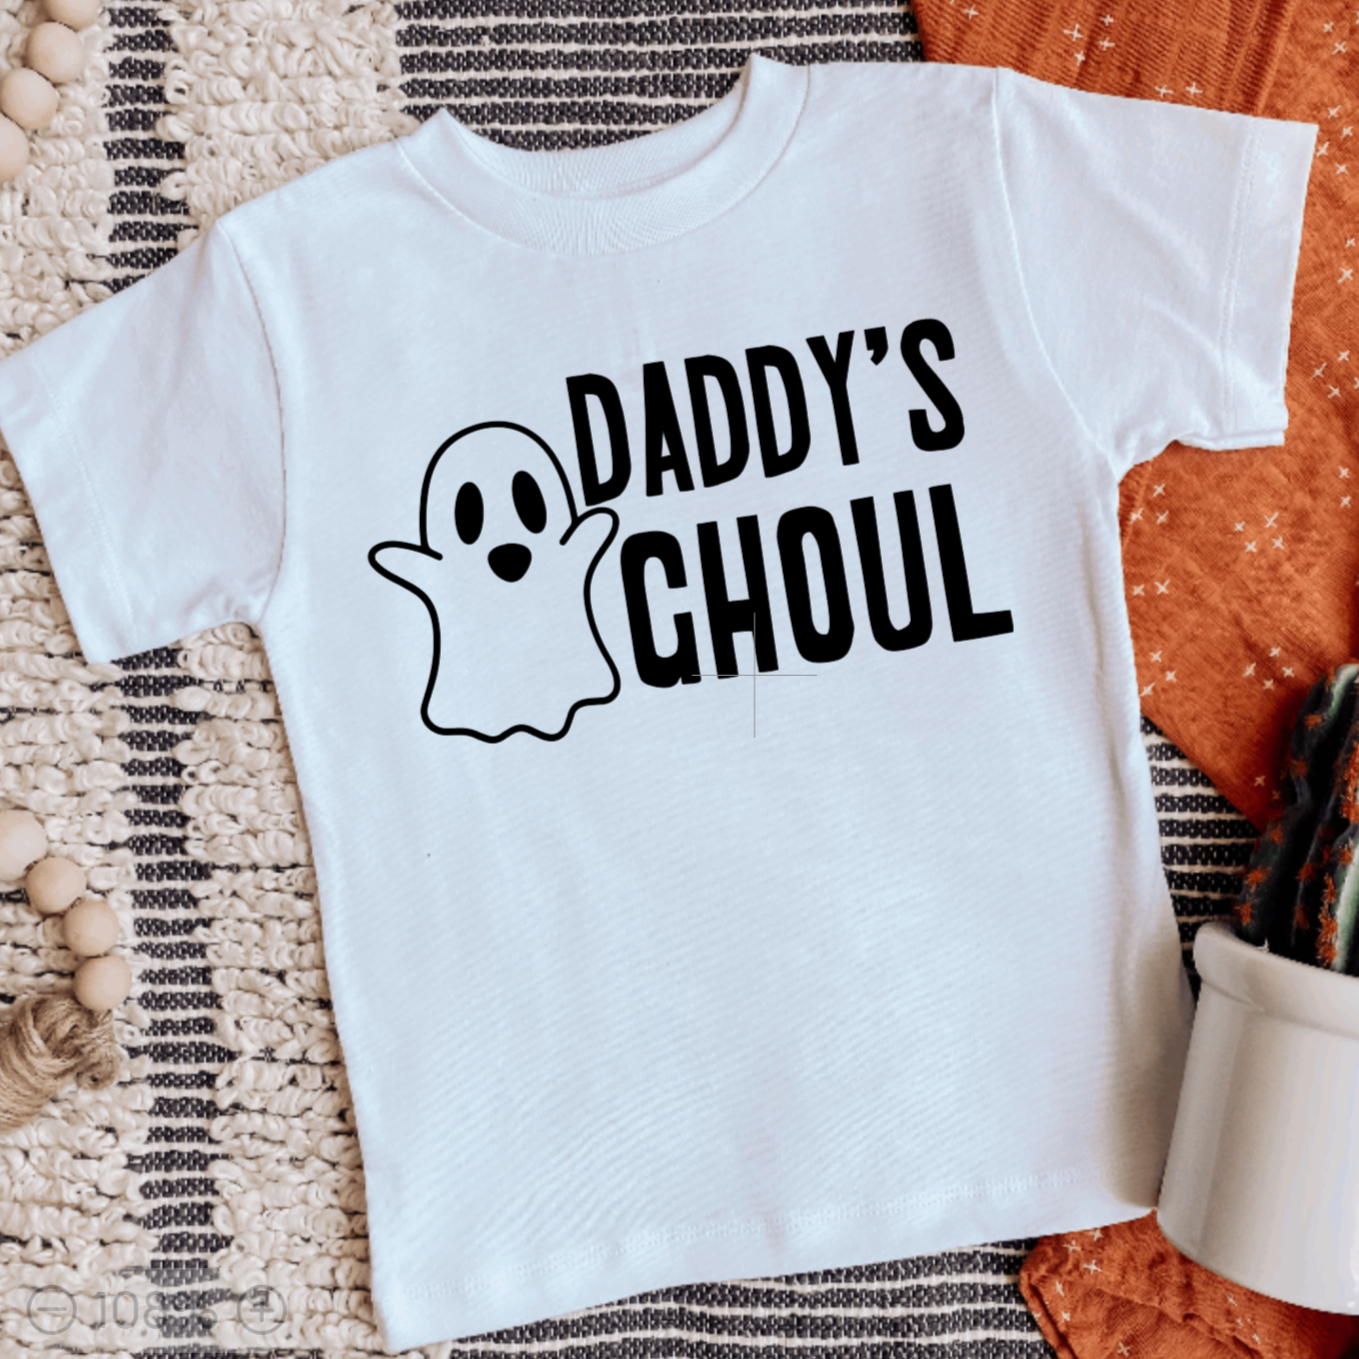 Mama's Boo or Daddy's Ghoul Halloween T-Shirt for Kids Salt and Sparkle